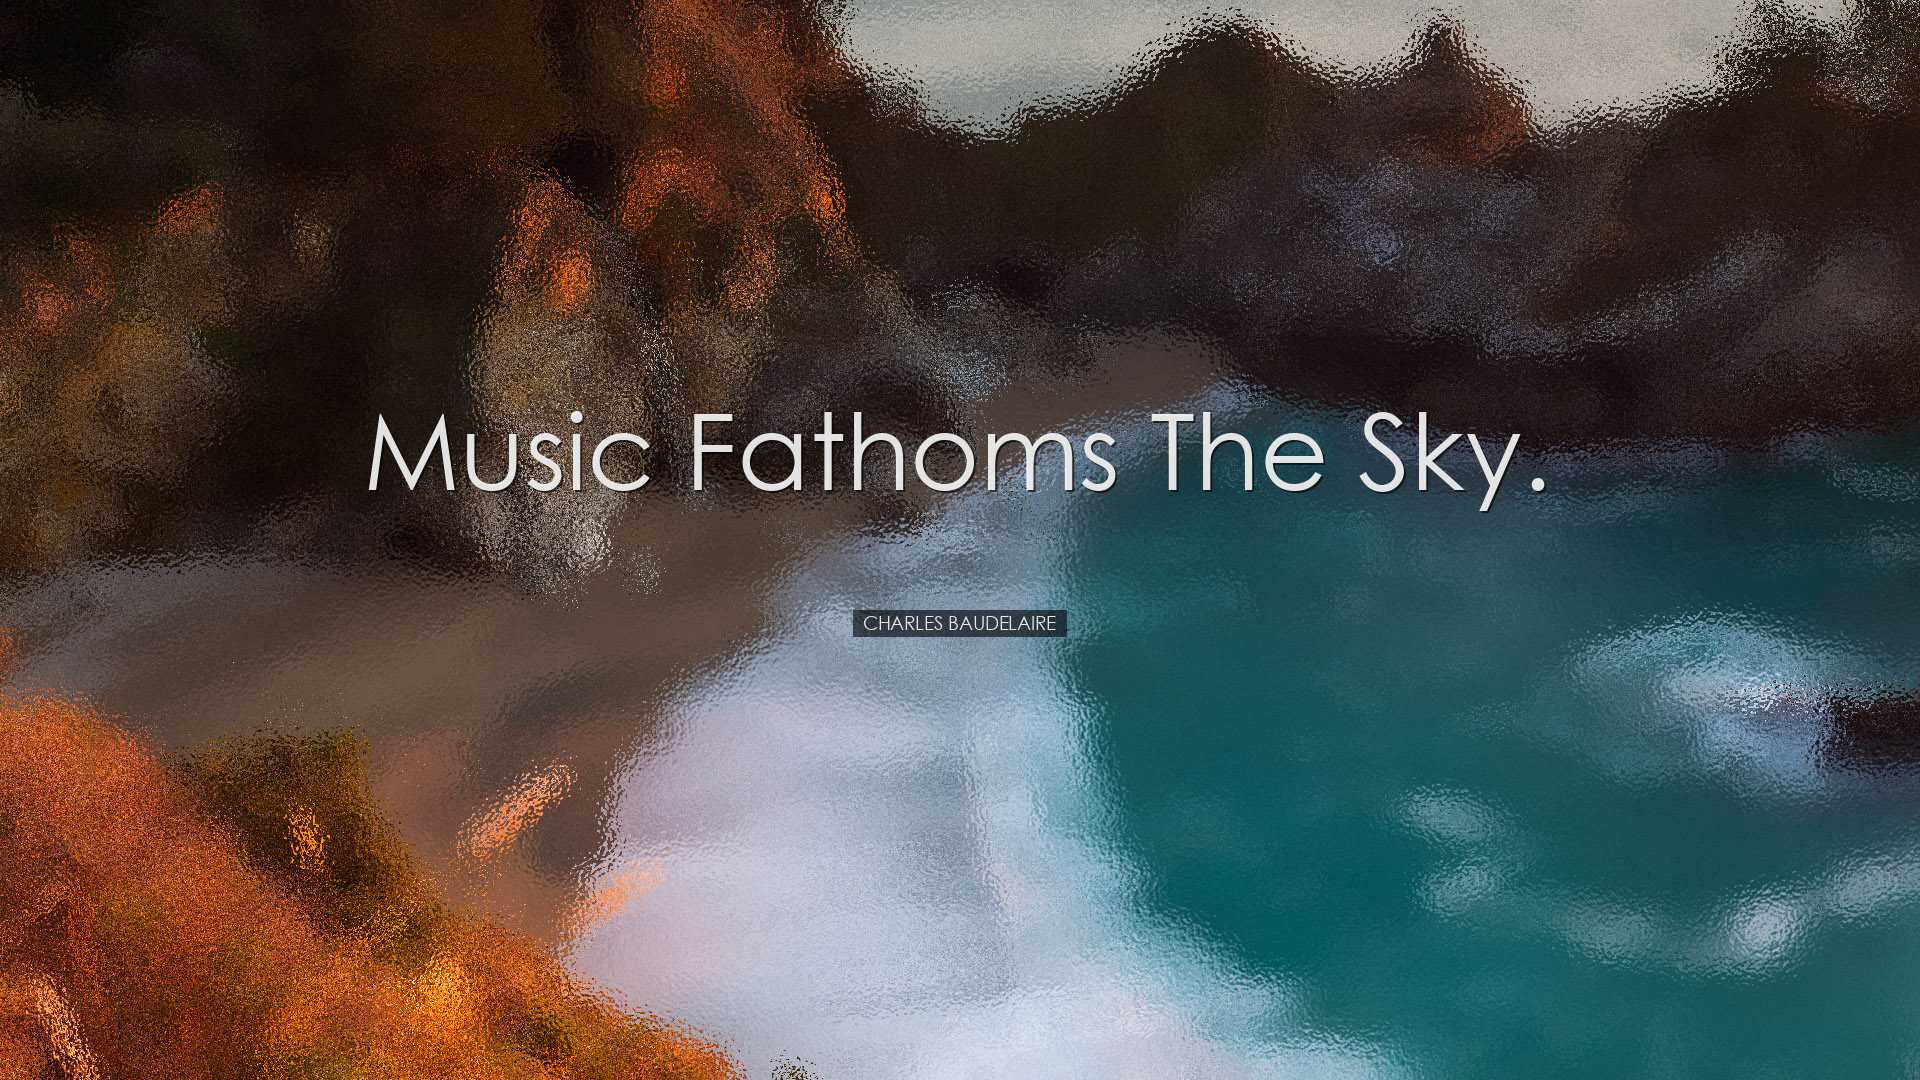 Music fathoms the sky. - Charles Baudelaire